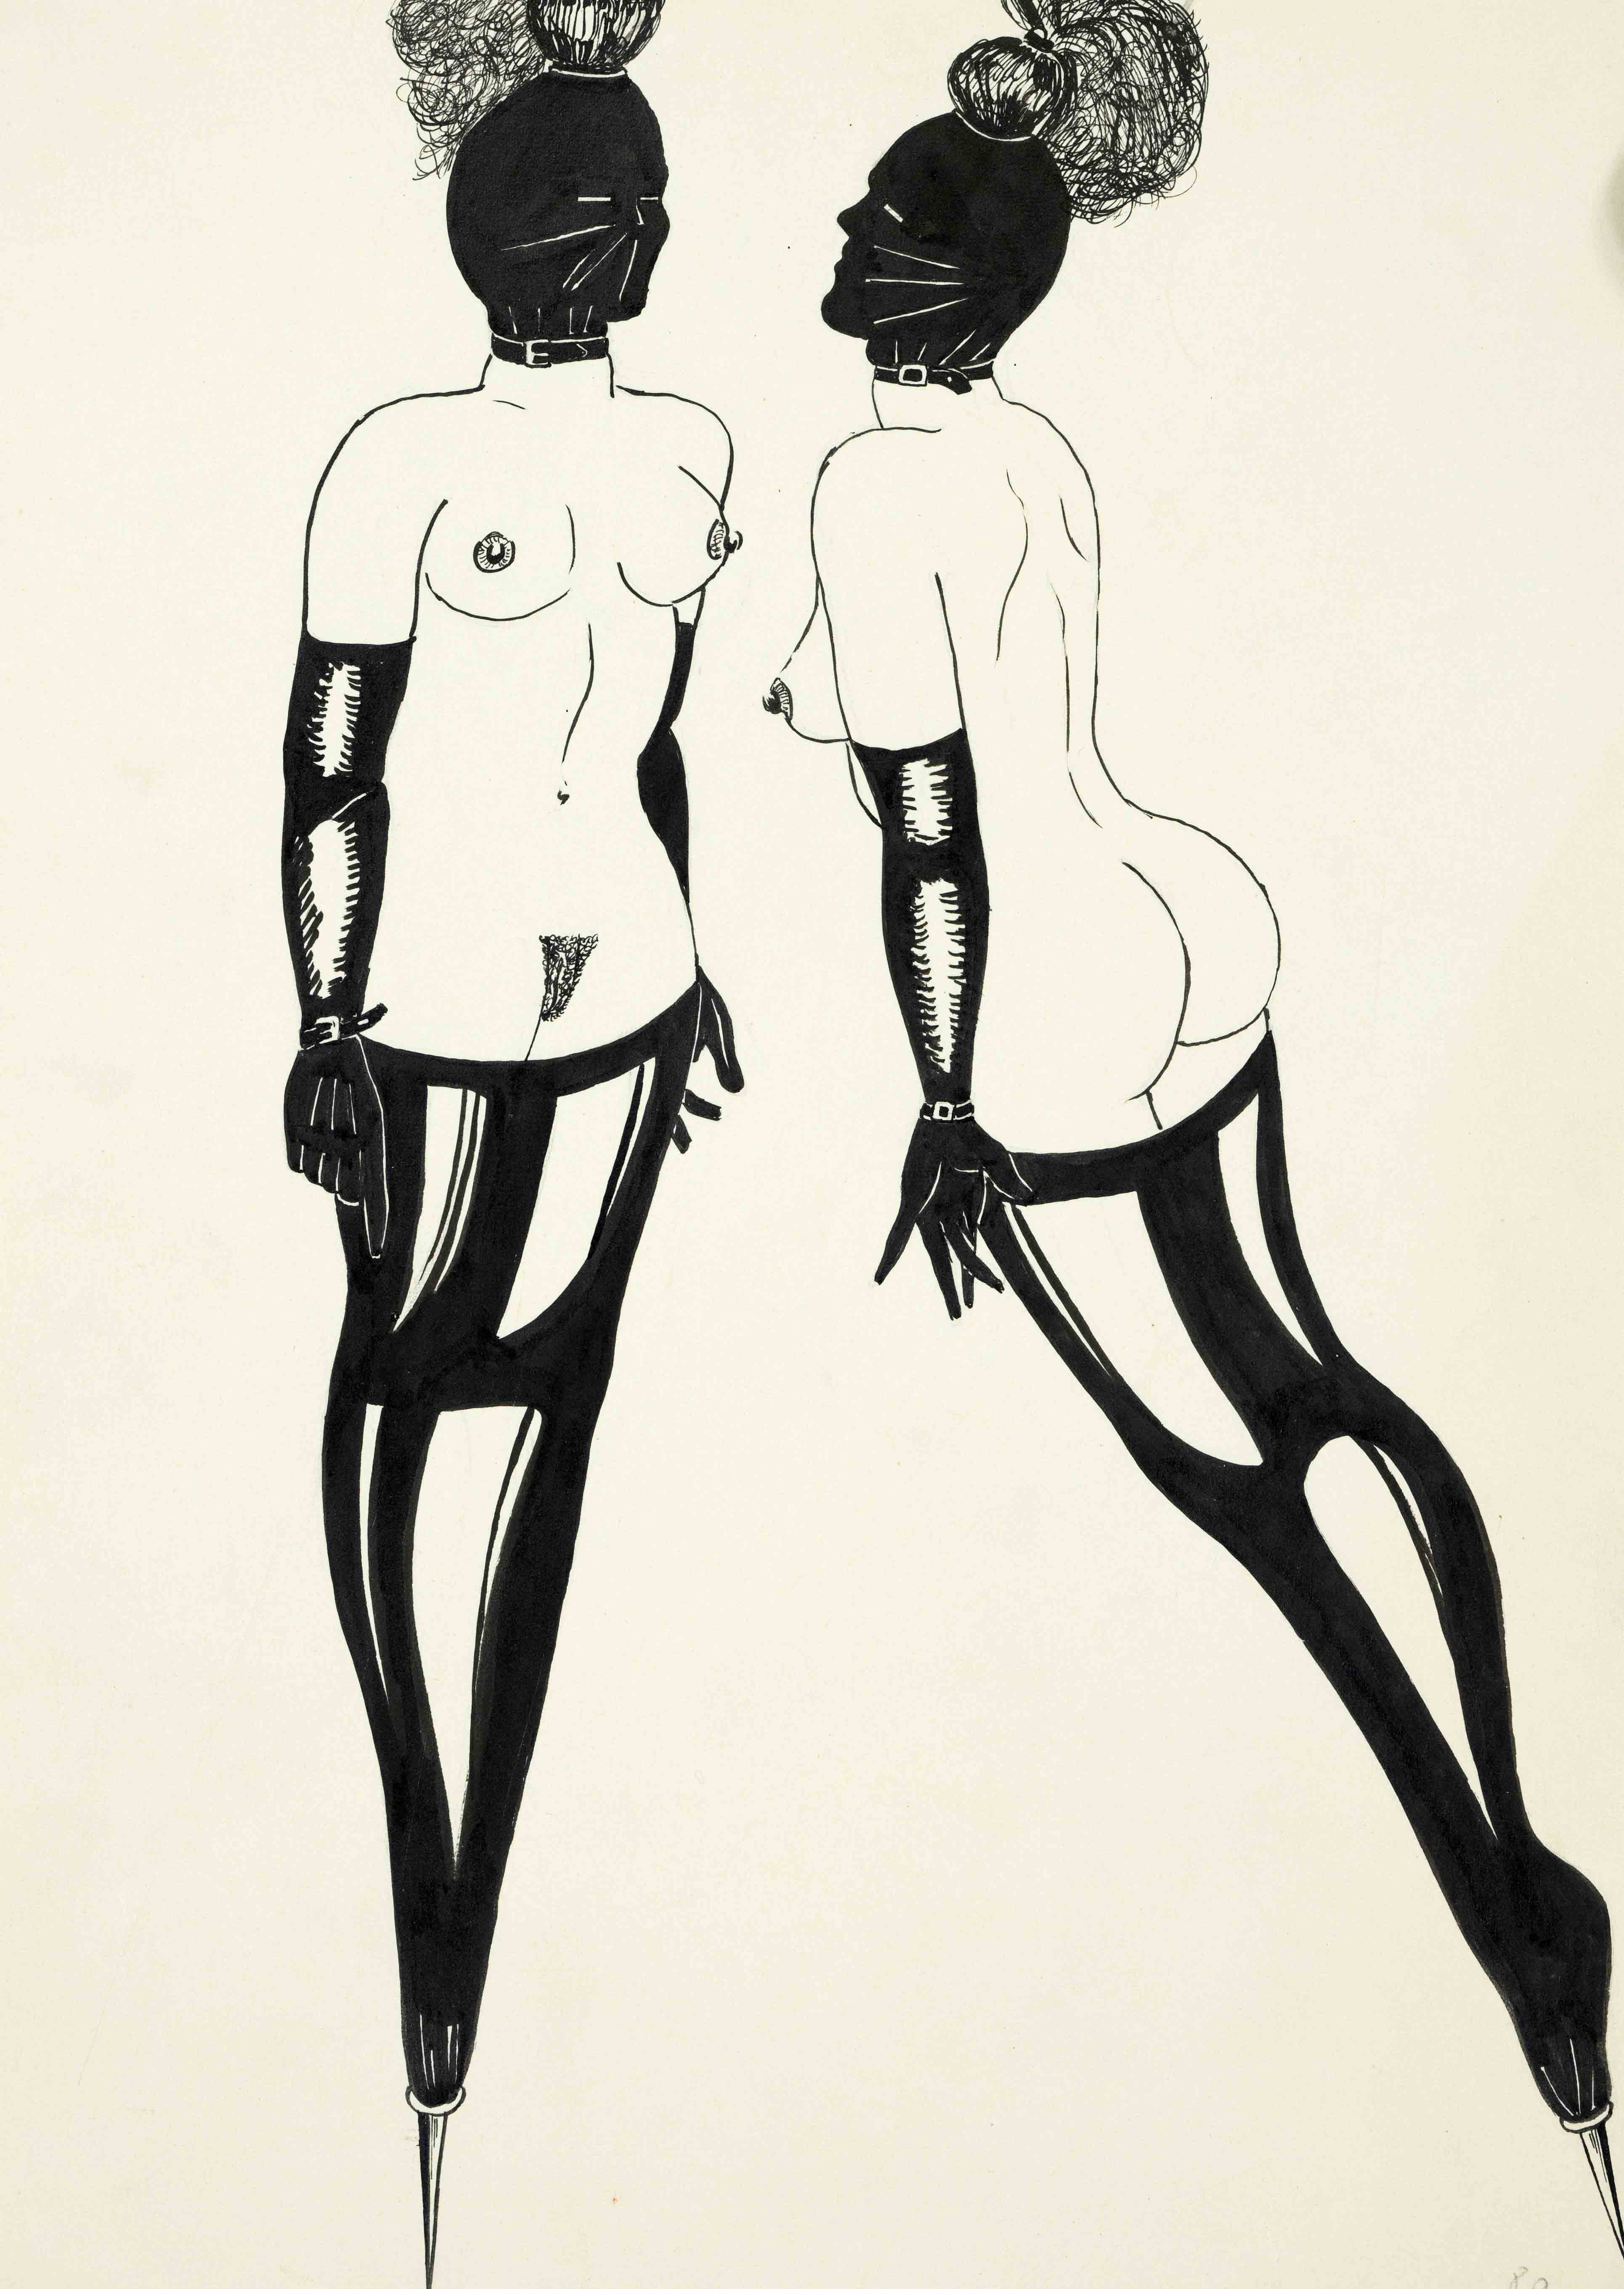 Erotica -- anonymous artist c. 1970, three explicitly erotic drawings with dominatrix and SM motifs,